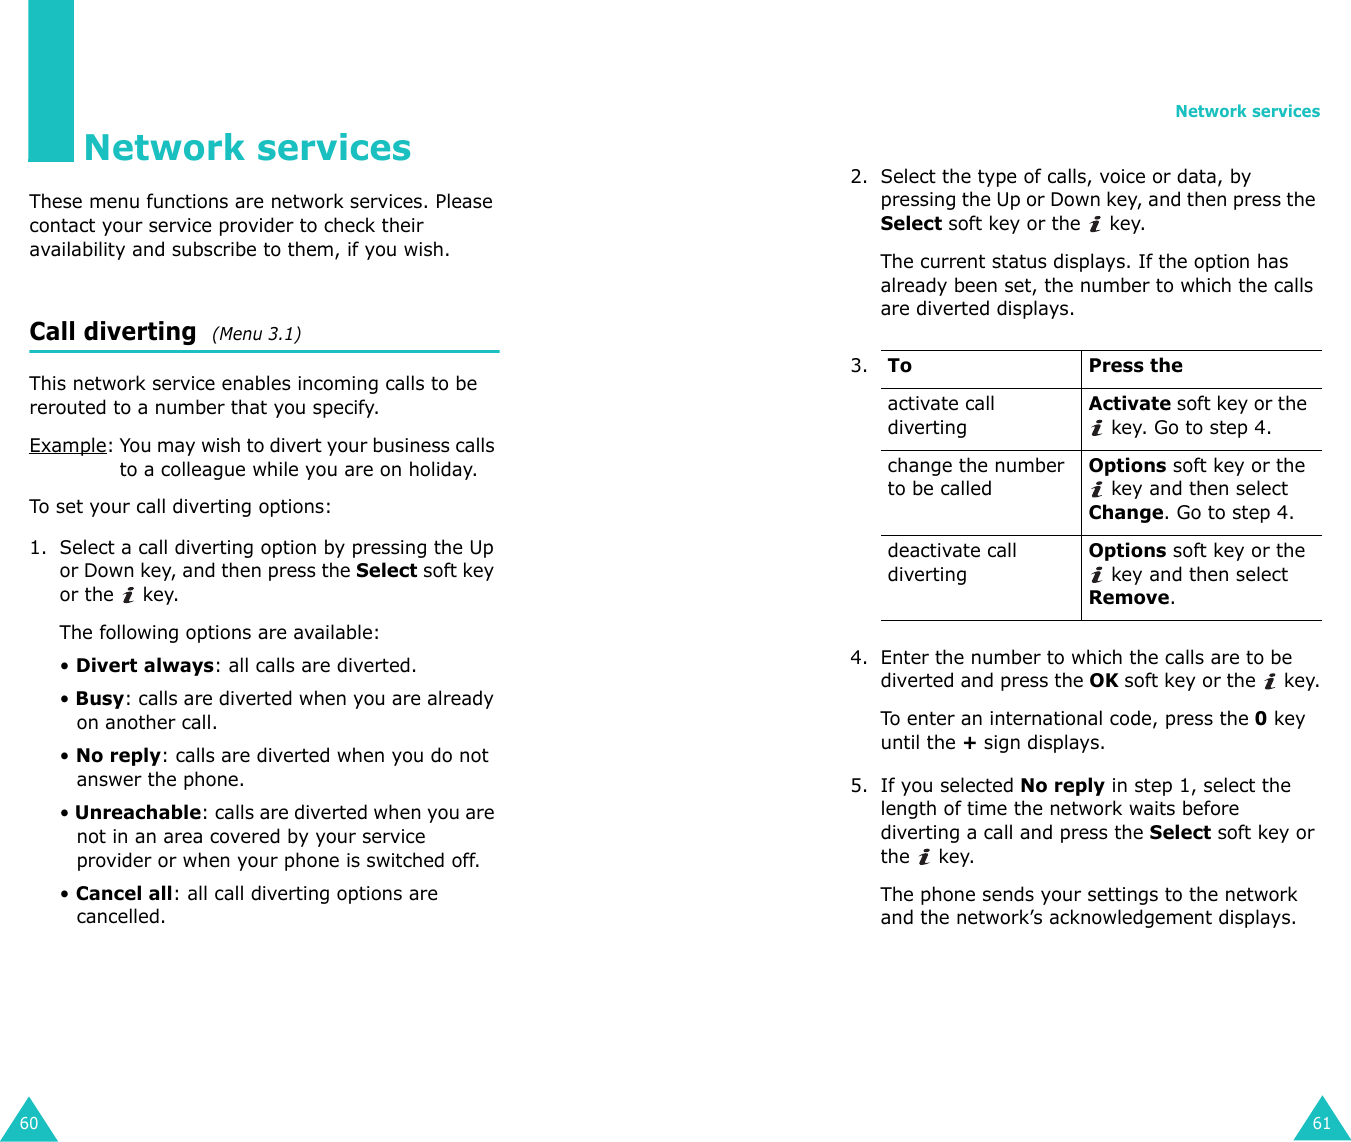 60Network servicesThese menu functions are network services. Please contact your service provider to check their availability and subscribe to them, if you wish.Call diverting  (Menu 3.1) This network service enables incoming calls to be rerouted to a number that you specify.Example: You may wish to divert your business calls to a colleague while you are on holiday.To set your call diverting options:1. Select a call diverting option by pressing the Up or Down key, and then press the Select soft key or the   key.The following options are available:• Divert always: all calls are diverted.• Busy: calls are diverted when you are already on another call.• No reply: calls are diverted when you do not answer the phone.• Unreachable: calls are diverted when you are not in an area covered by your service provider or when your phone is switched off.• Cancel all: all call diverting options are cancelled.Network services612. Select the type of calls, voice or data, by pressing the Up or Down key, and then press the Select soft key or the   key.The current status displays. If the option has already been set, the number to which the calls are diverted displays.4. Enter the number to which the calls are to be diverted and press the OK soft key or the   key.To enter an international code, press the 0 key until the + sign displays.5. If you selected No reply in step 1, select the length of time the network waits before diverting a call and press the Select soft key or the  key.The phone sends your settings to the network and the network’s acknowledgement displays.3.To Press theactivate call divertingActivate soft key or the  key. Go to step 4.change the number to be calledOptions soft key or the  key and then select Change. Go to step 4. deactivate call divertingOptions soft key or the  key and then select Remove.